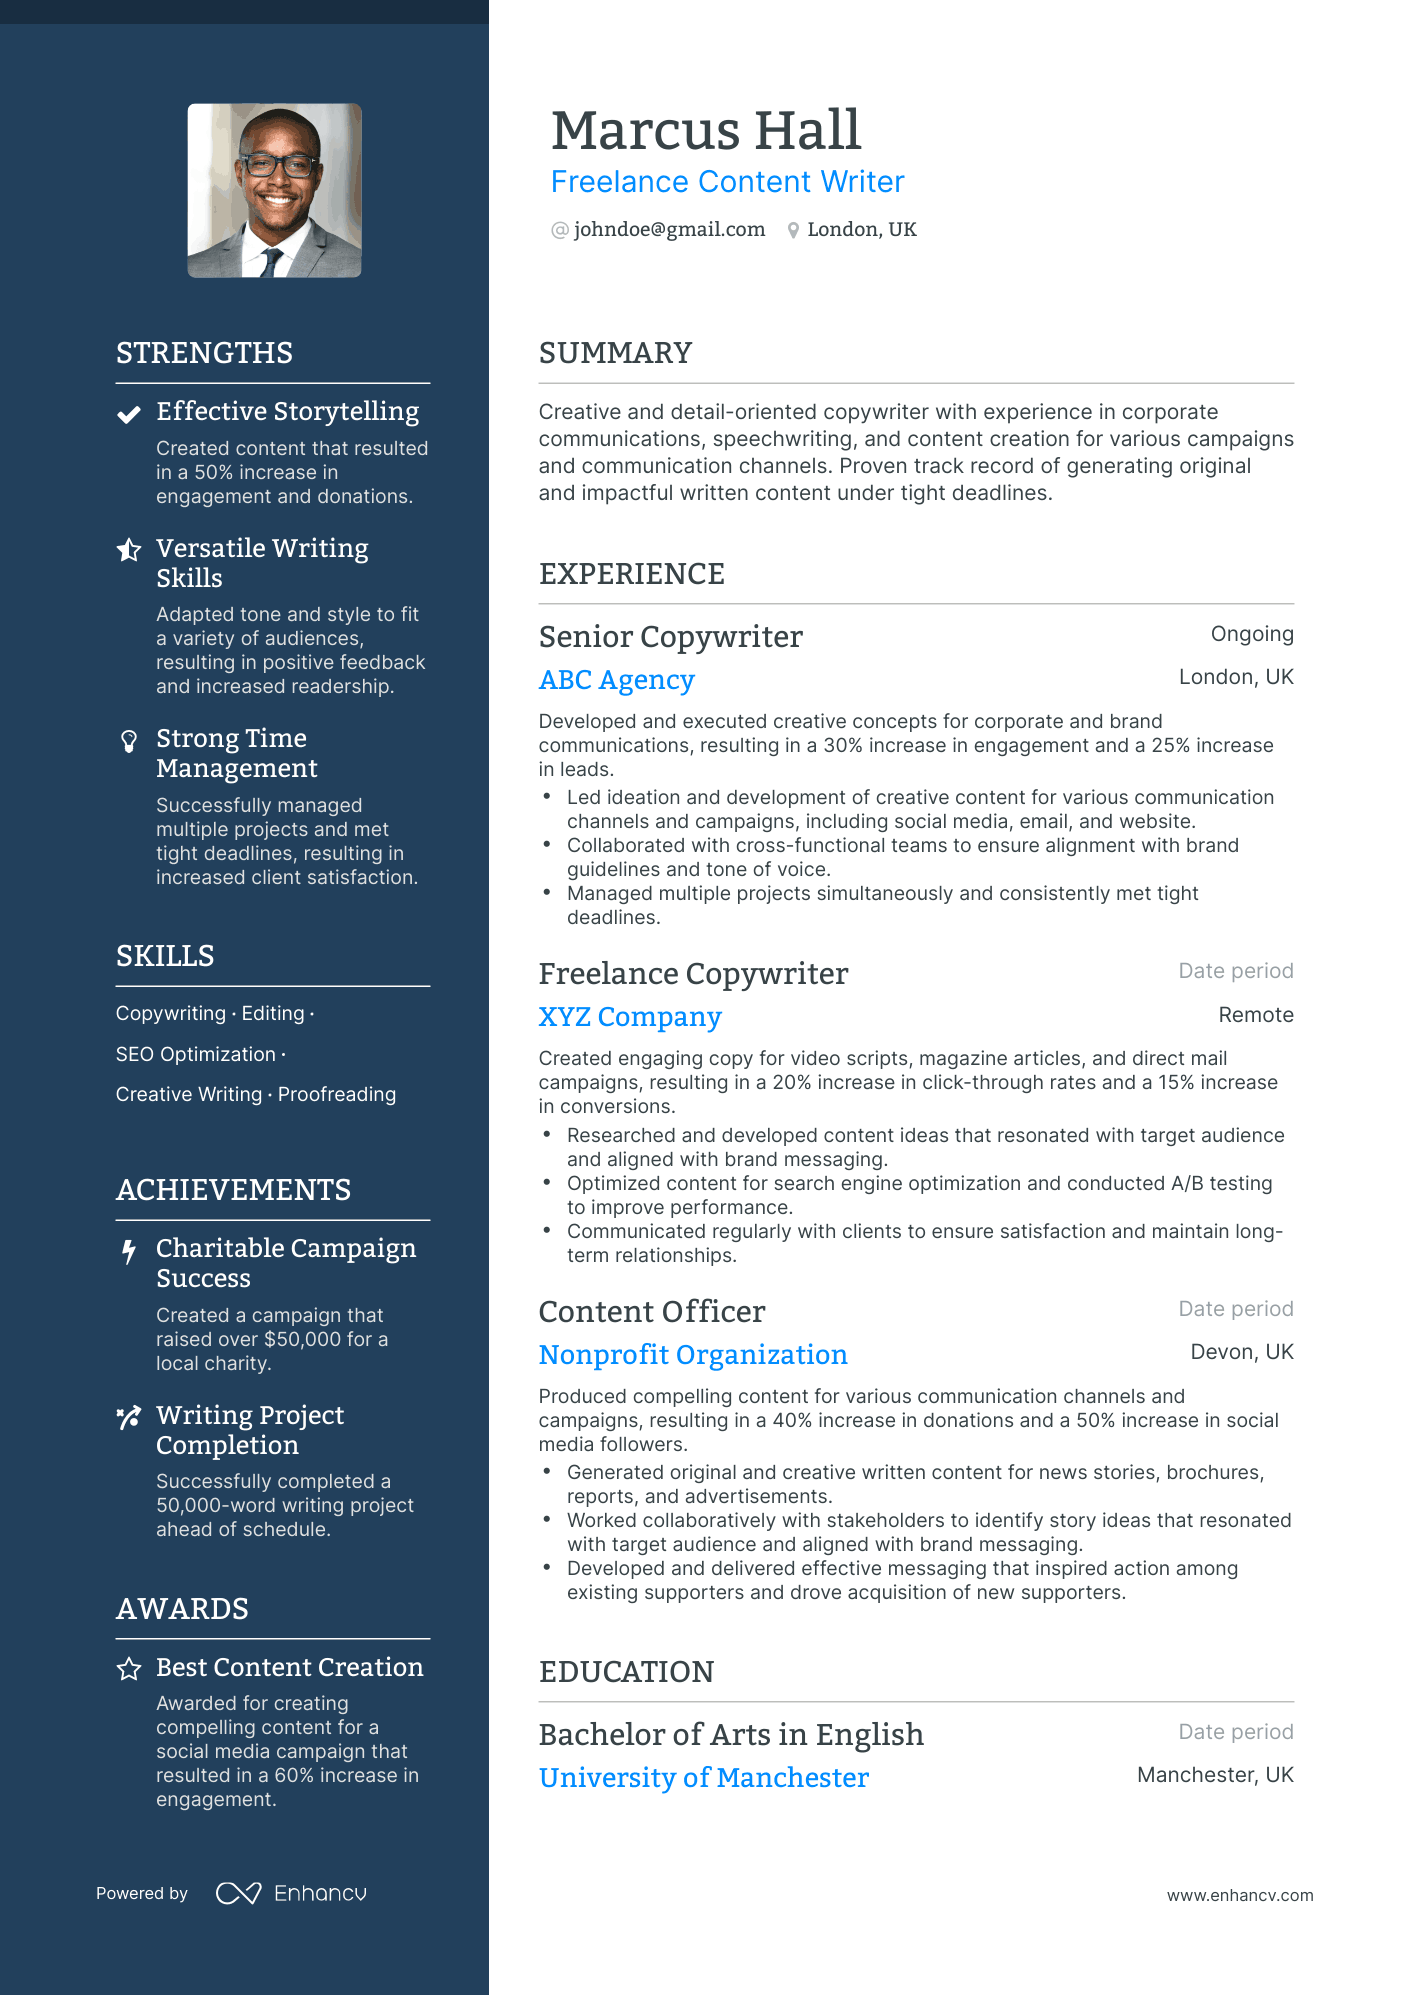 Polished Freelance Content Writer Resume Template